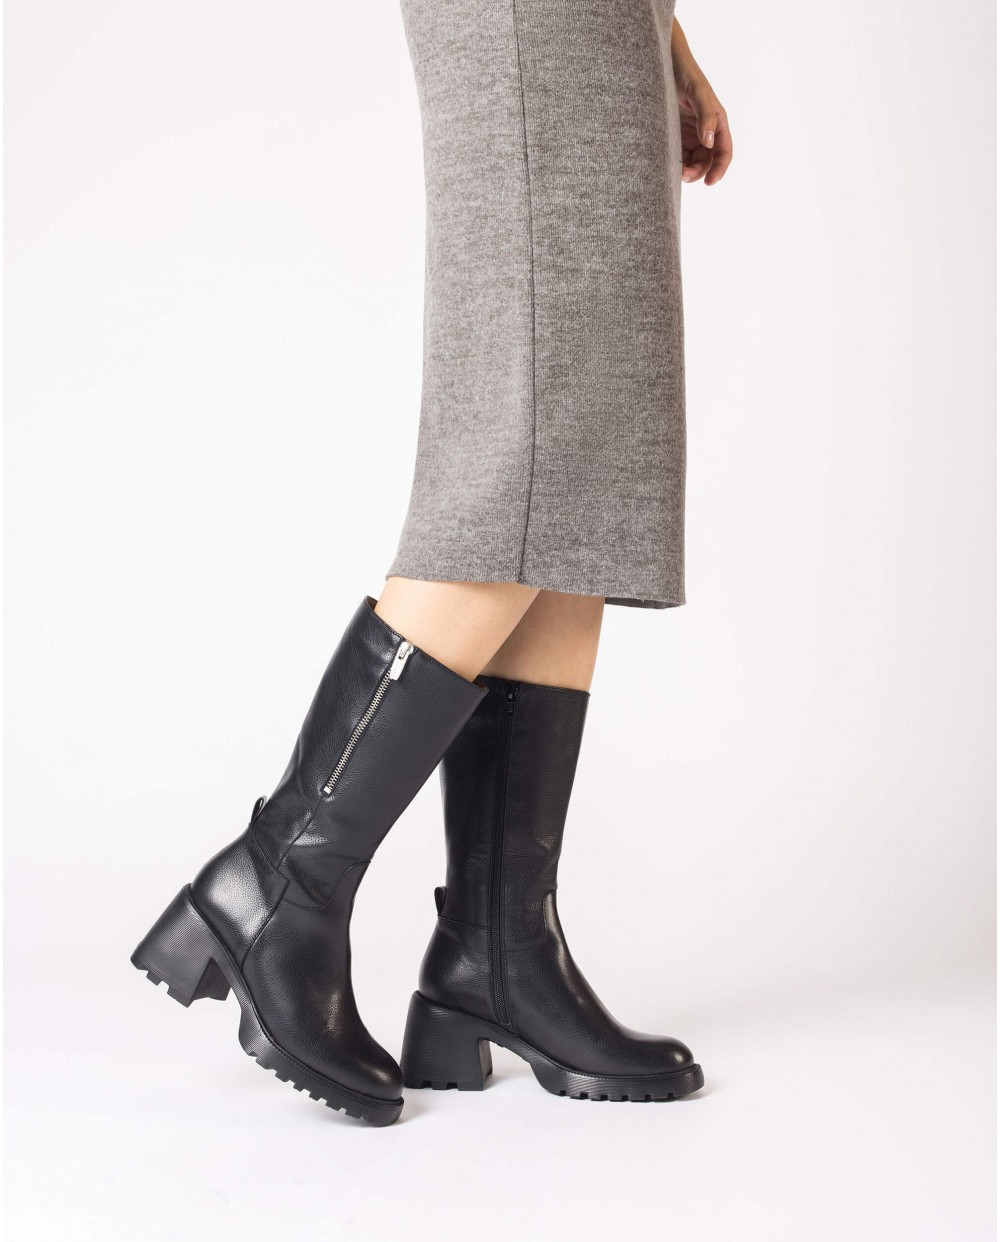 Wonders-Boots-Black NEO ankle boot